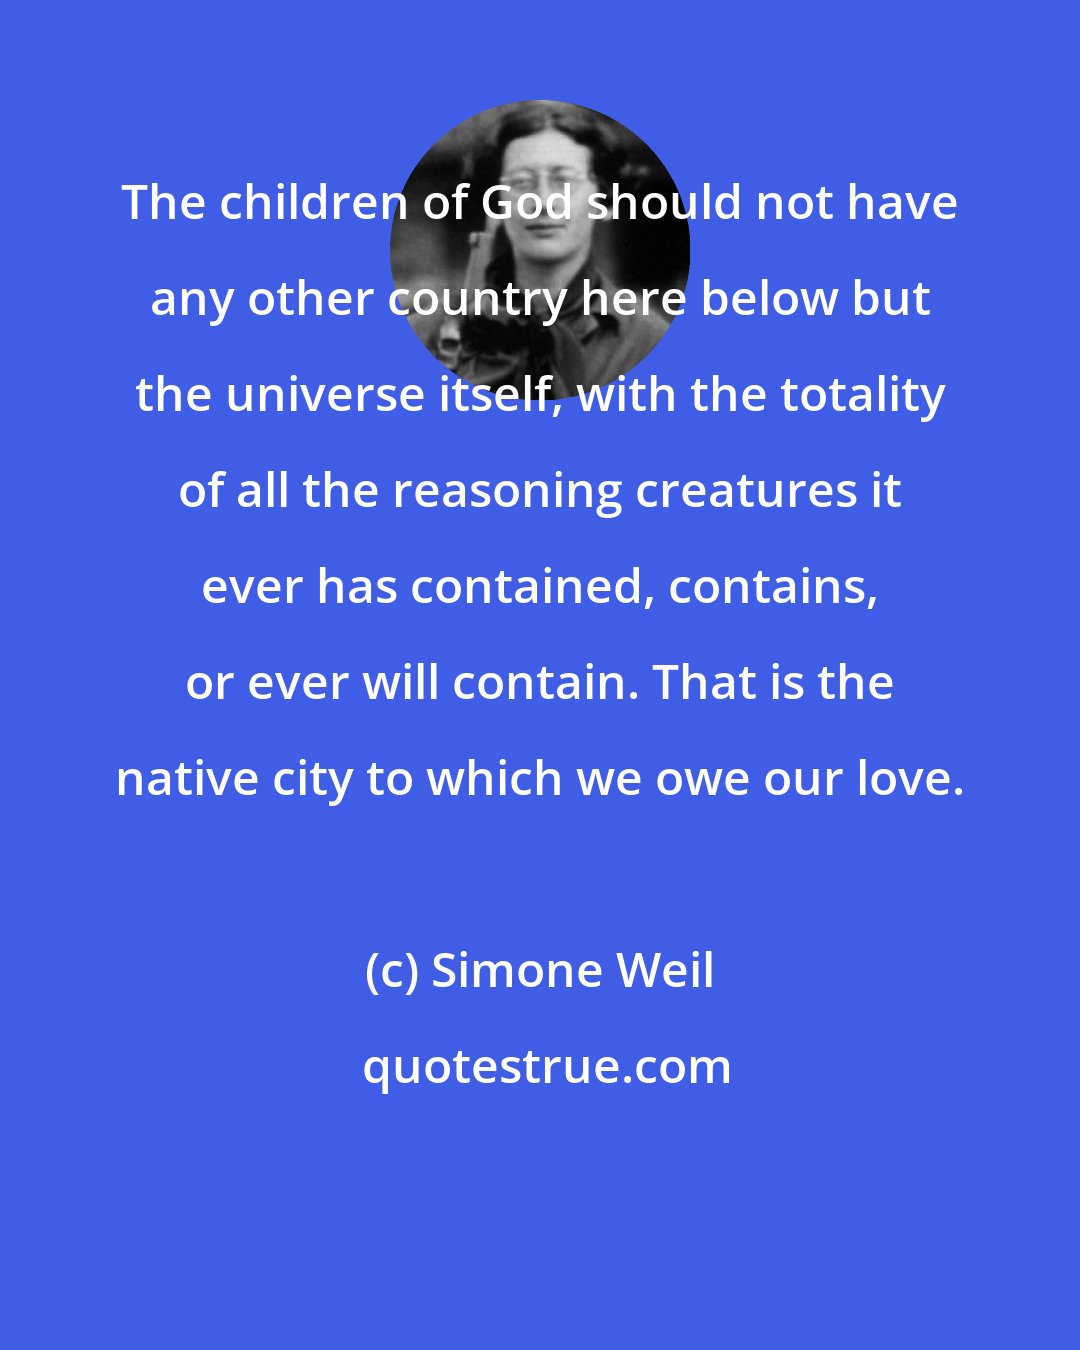 Simone Weil: The children of God should not have any other country here below but the universe itself, with the totality of all the reasoning creatures it ever has contained, contains, or ever will contain. That is the native city to which we owe our love.